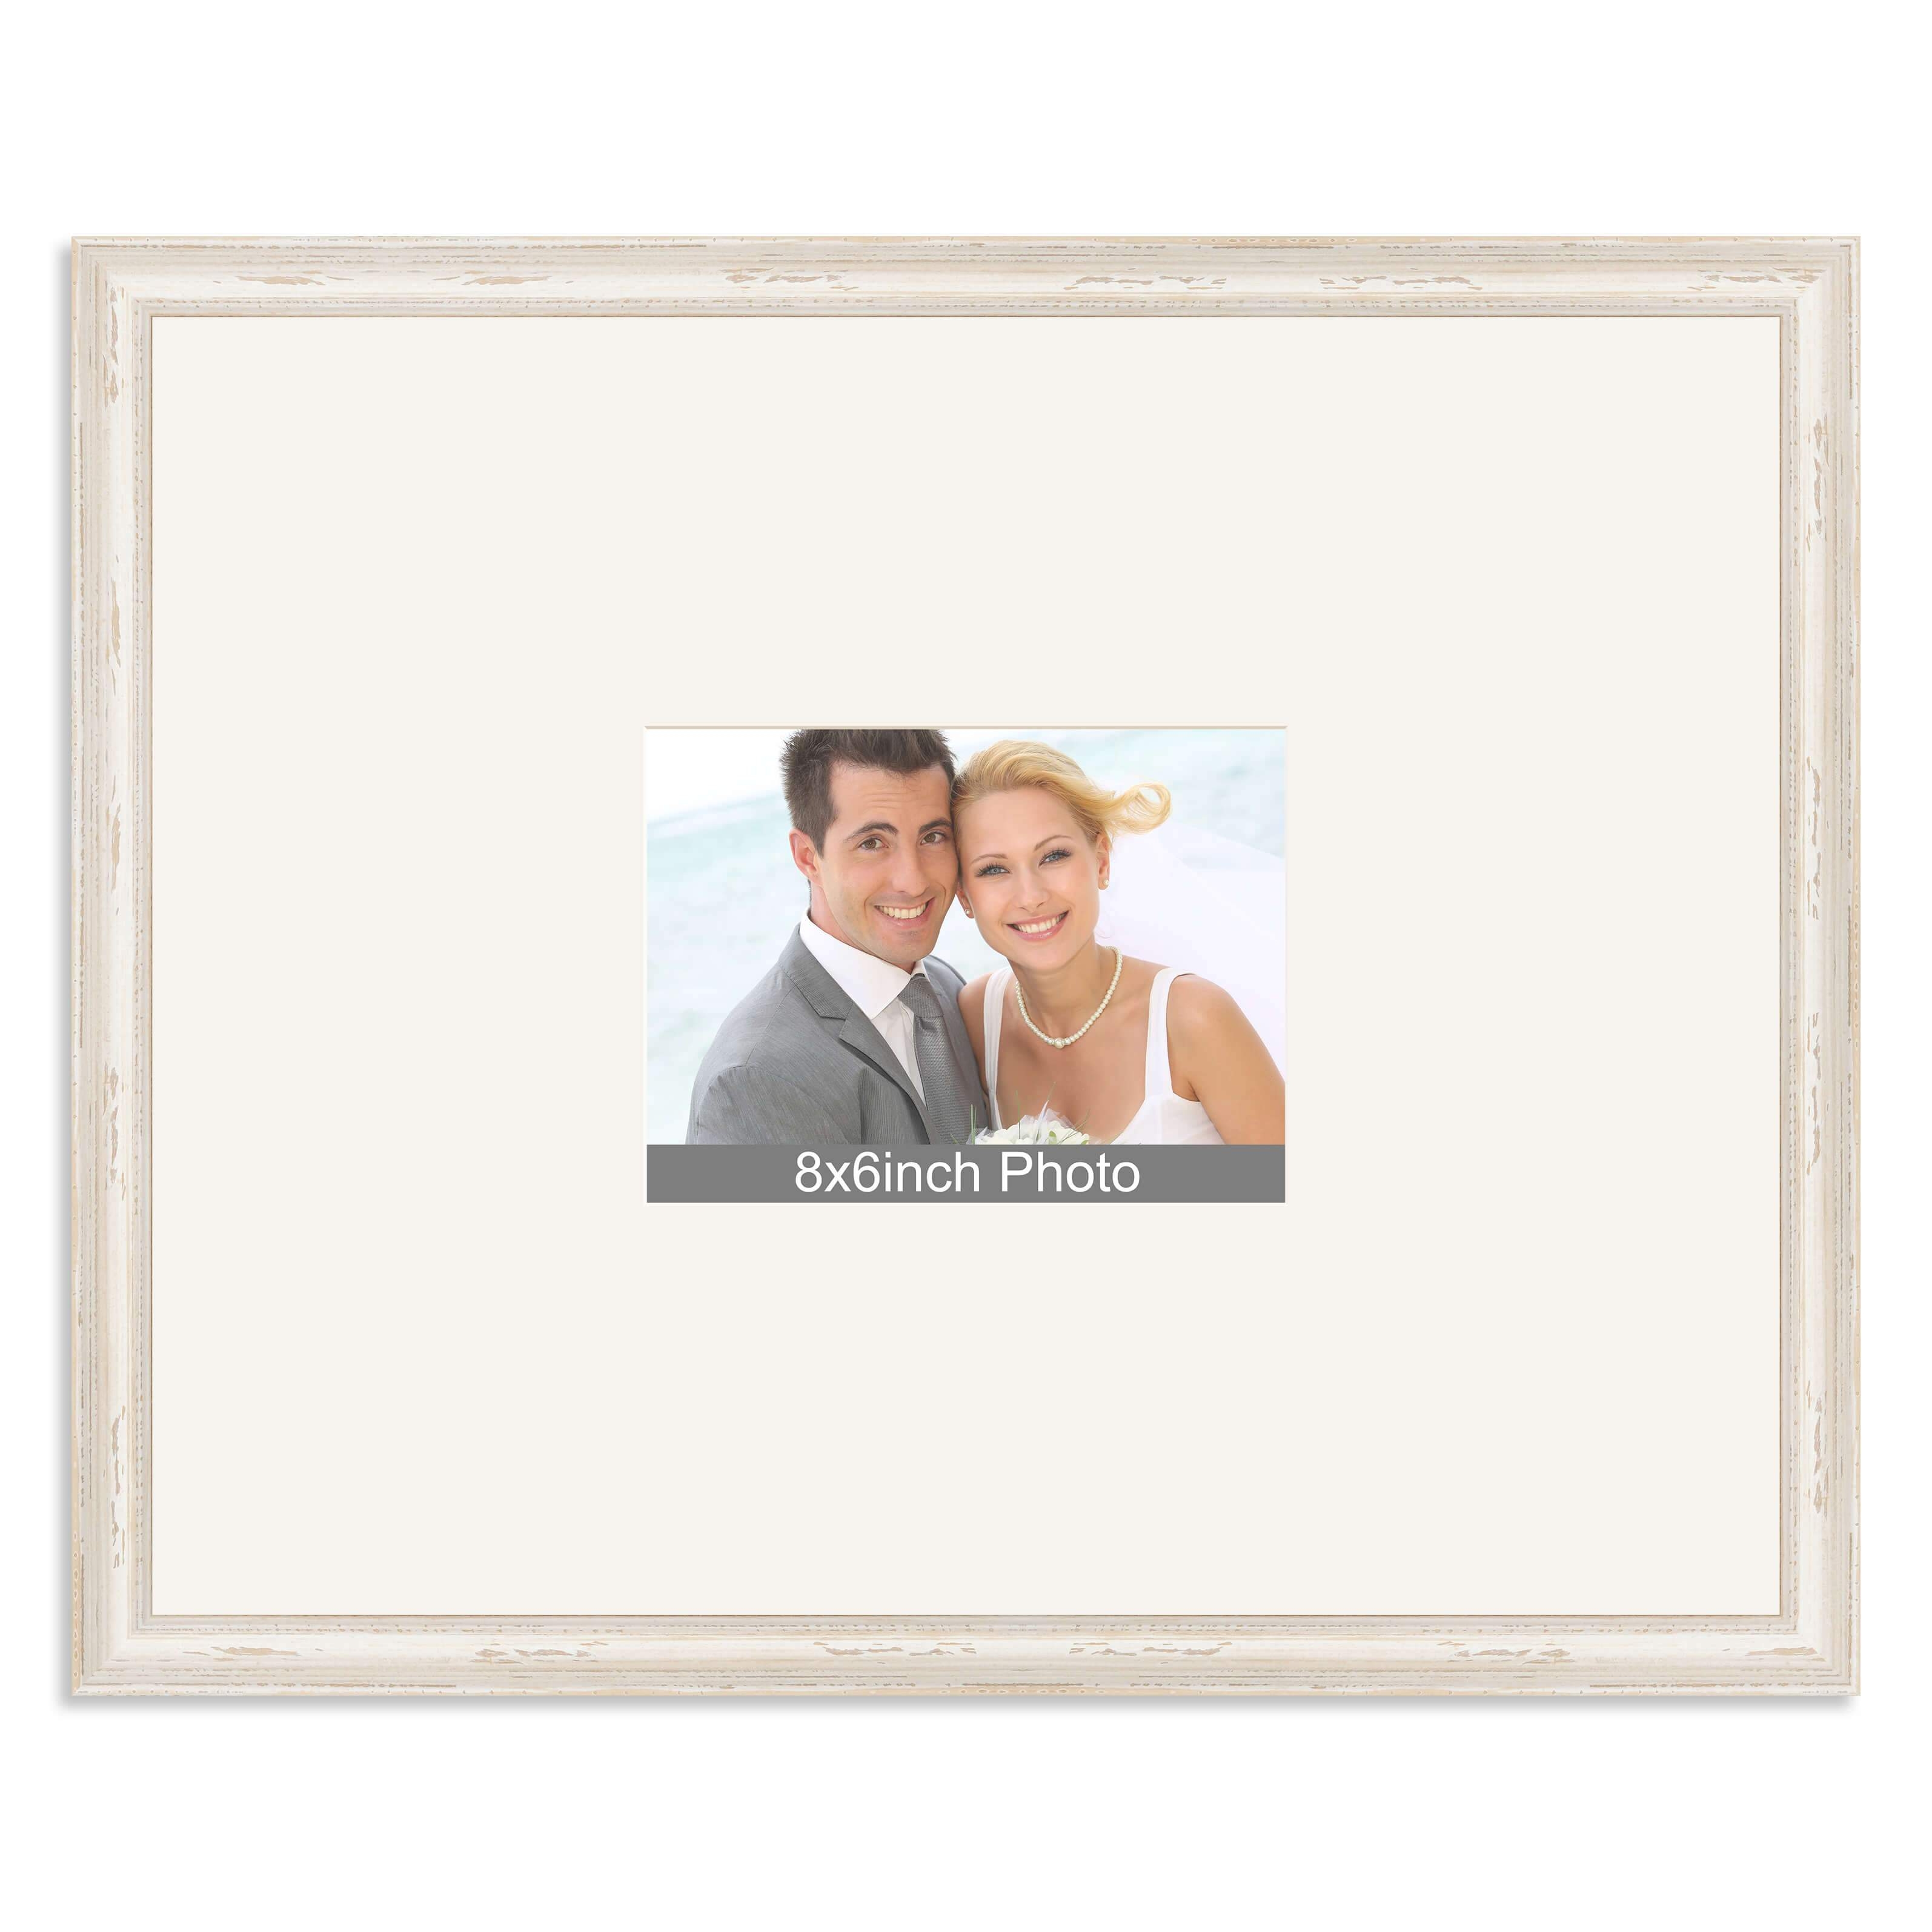 White Shabby Chic Wedding & Special Occasion Signing Frame for a 8×6/6x8in Photo